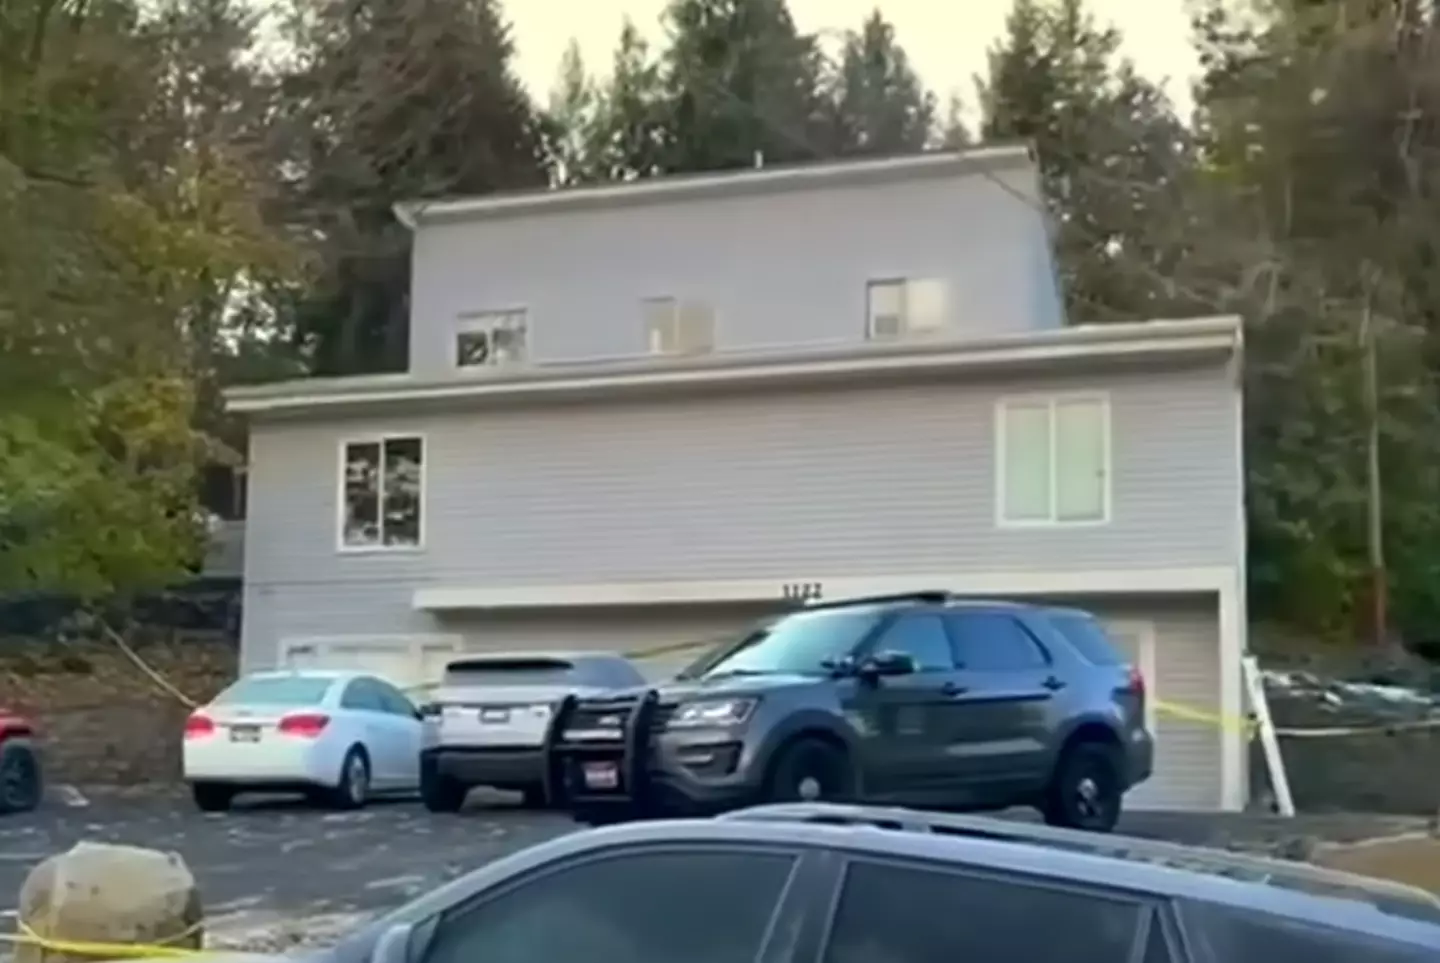 The student house has since been demolished. (KXLY/ABC News)